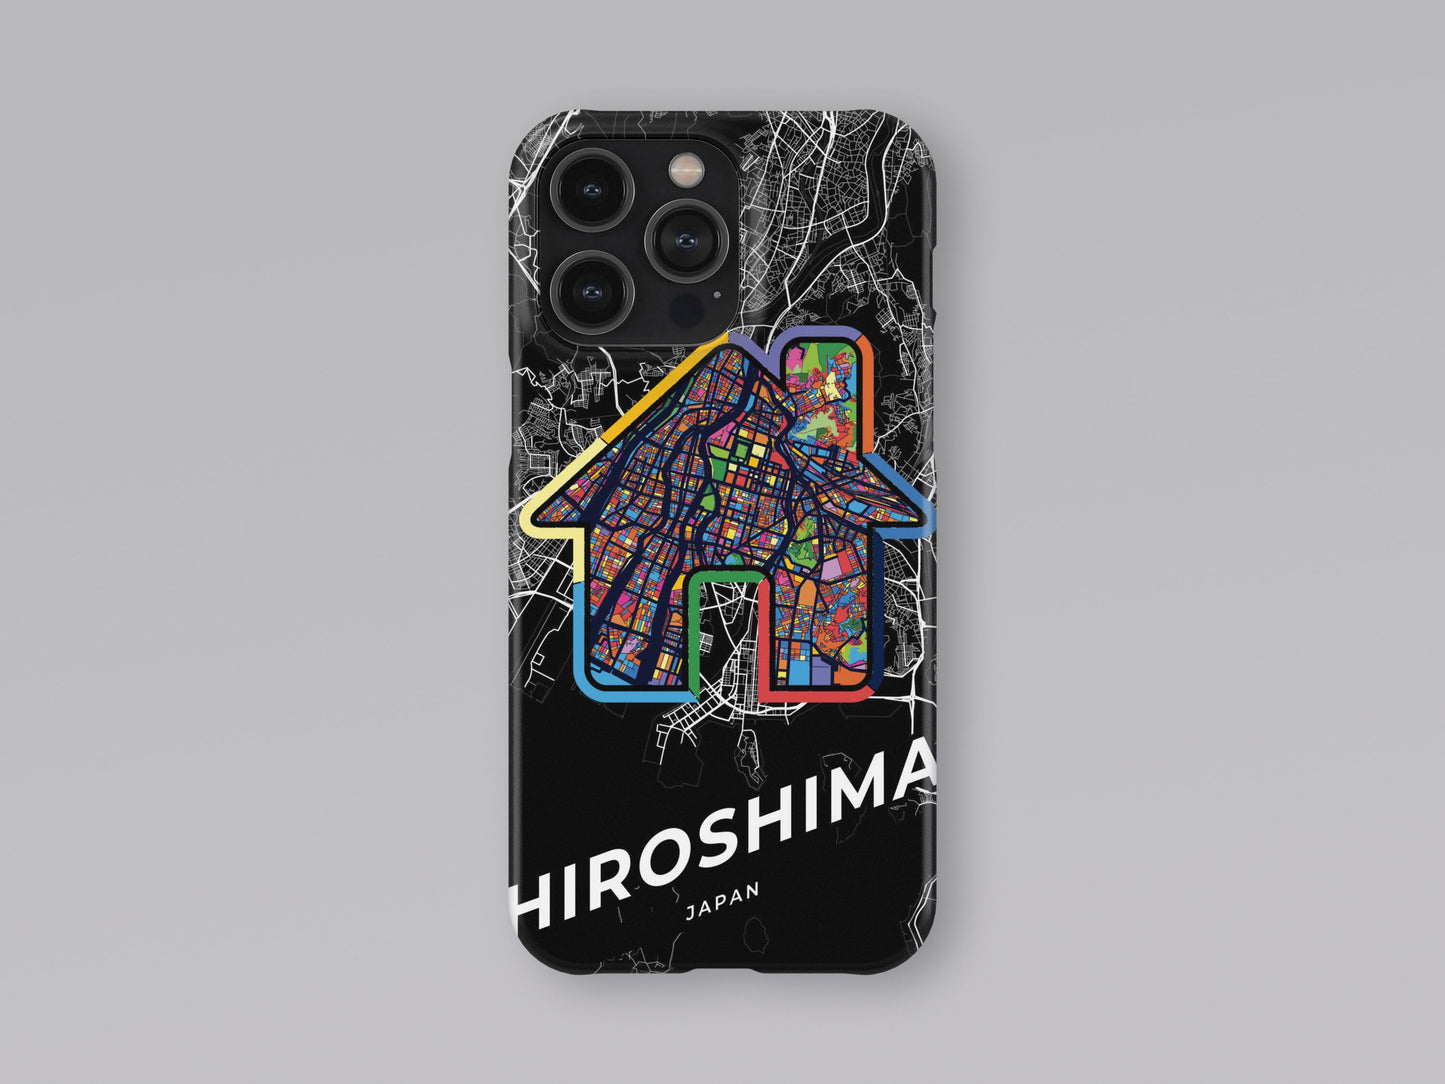 Hiroshima Japan slim phone case with colorful icon. Birthday, wedding or housewarming gift. Couple match cases. 3